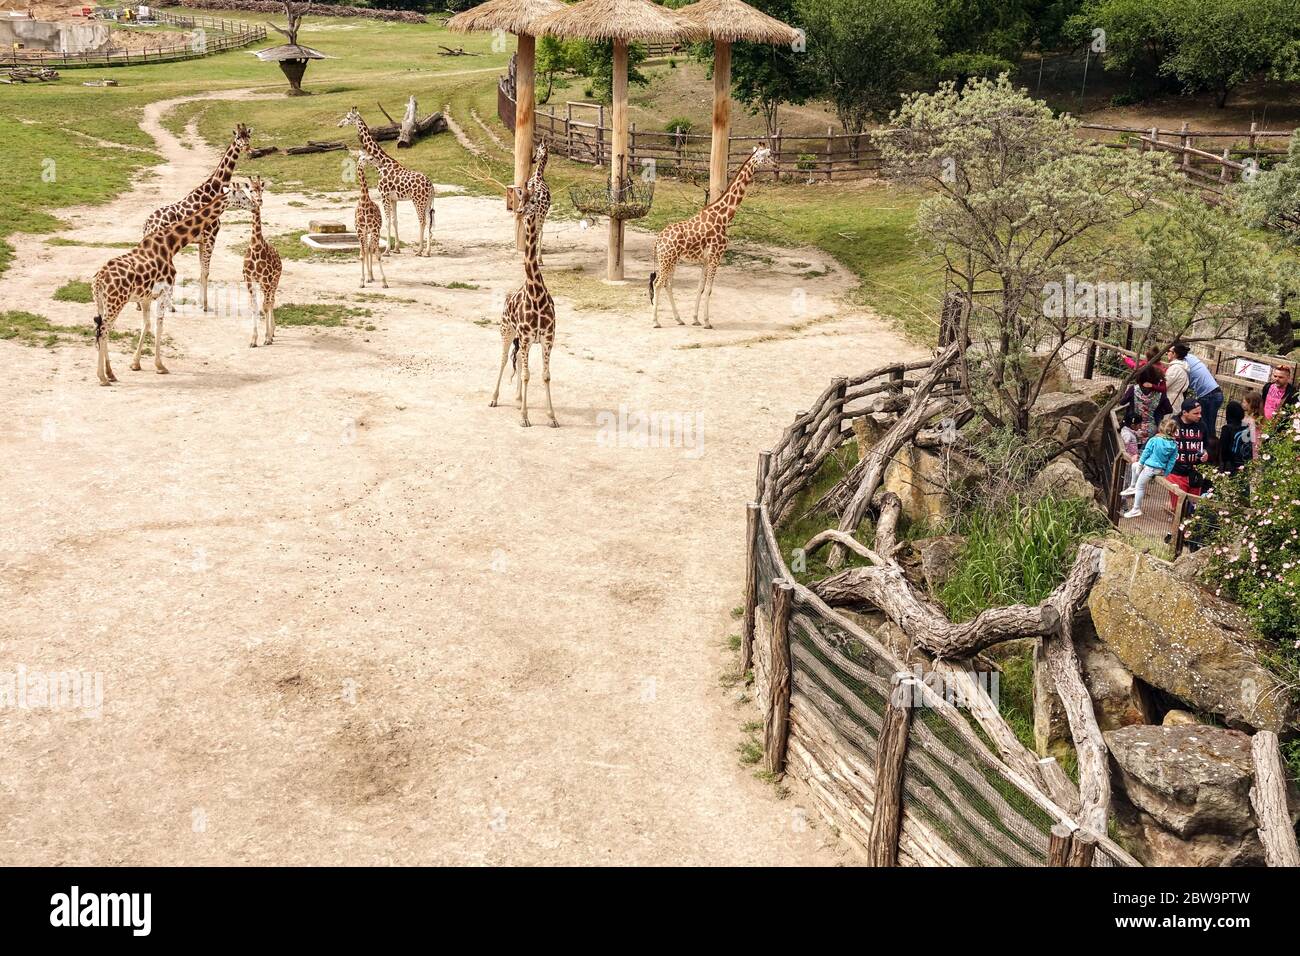 People, visitors, look at the giraffe enclosure at the Prague zoo giraffe, good event for a day trip for family with children Stock Photo